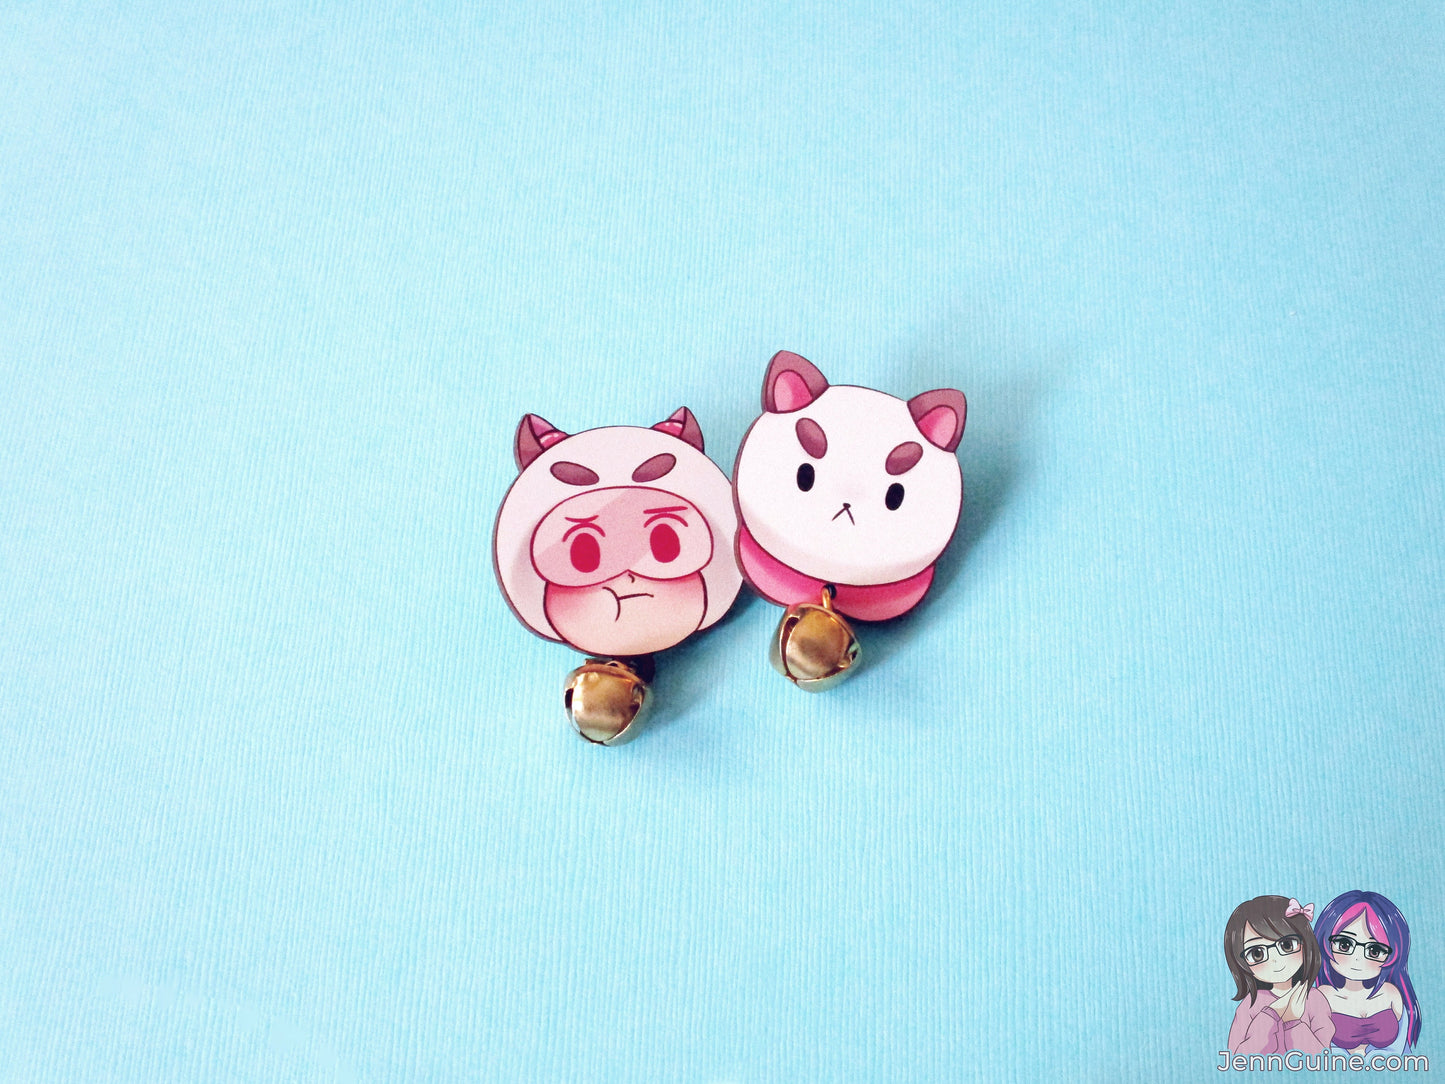 Bee and Puppycat Pilot Episode Wooden Pin with Gold Bell - Dangle pin, Wood pin, Eco Friendly Pin, Kawaii, Christmas - Unsure about restocks